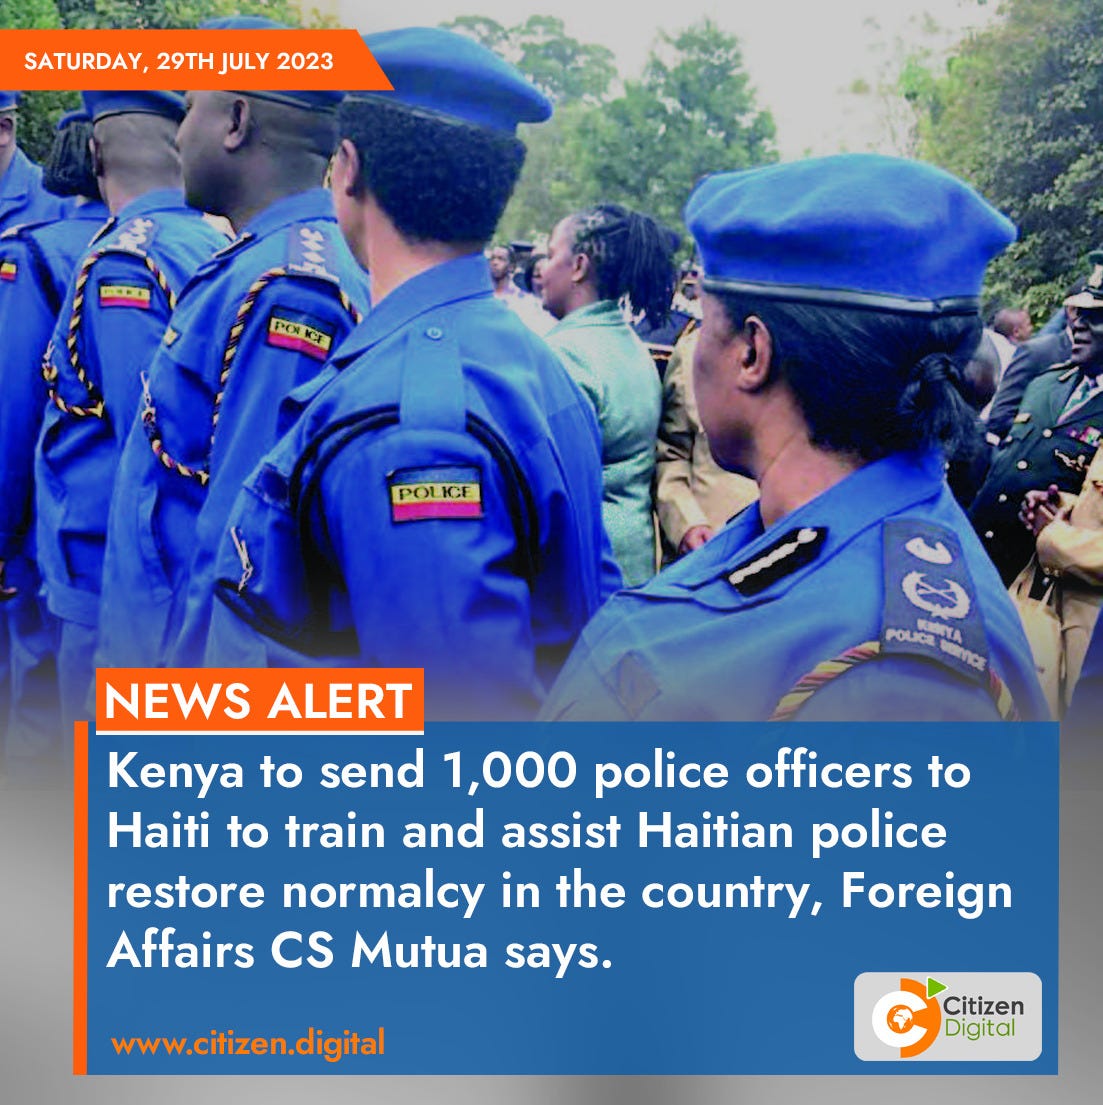 Citizen TV Kenya on Twitter: "Kenya to send 1,000 police officers to Haiti  to train and assist Haitian police restore normalcy in the country, Foreign  Affairs CS Mutua says https://t.co/Ln4GJgpk1s" / Twitter